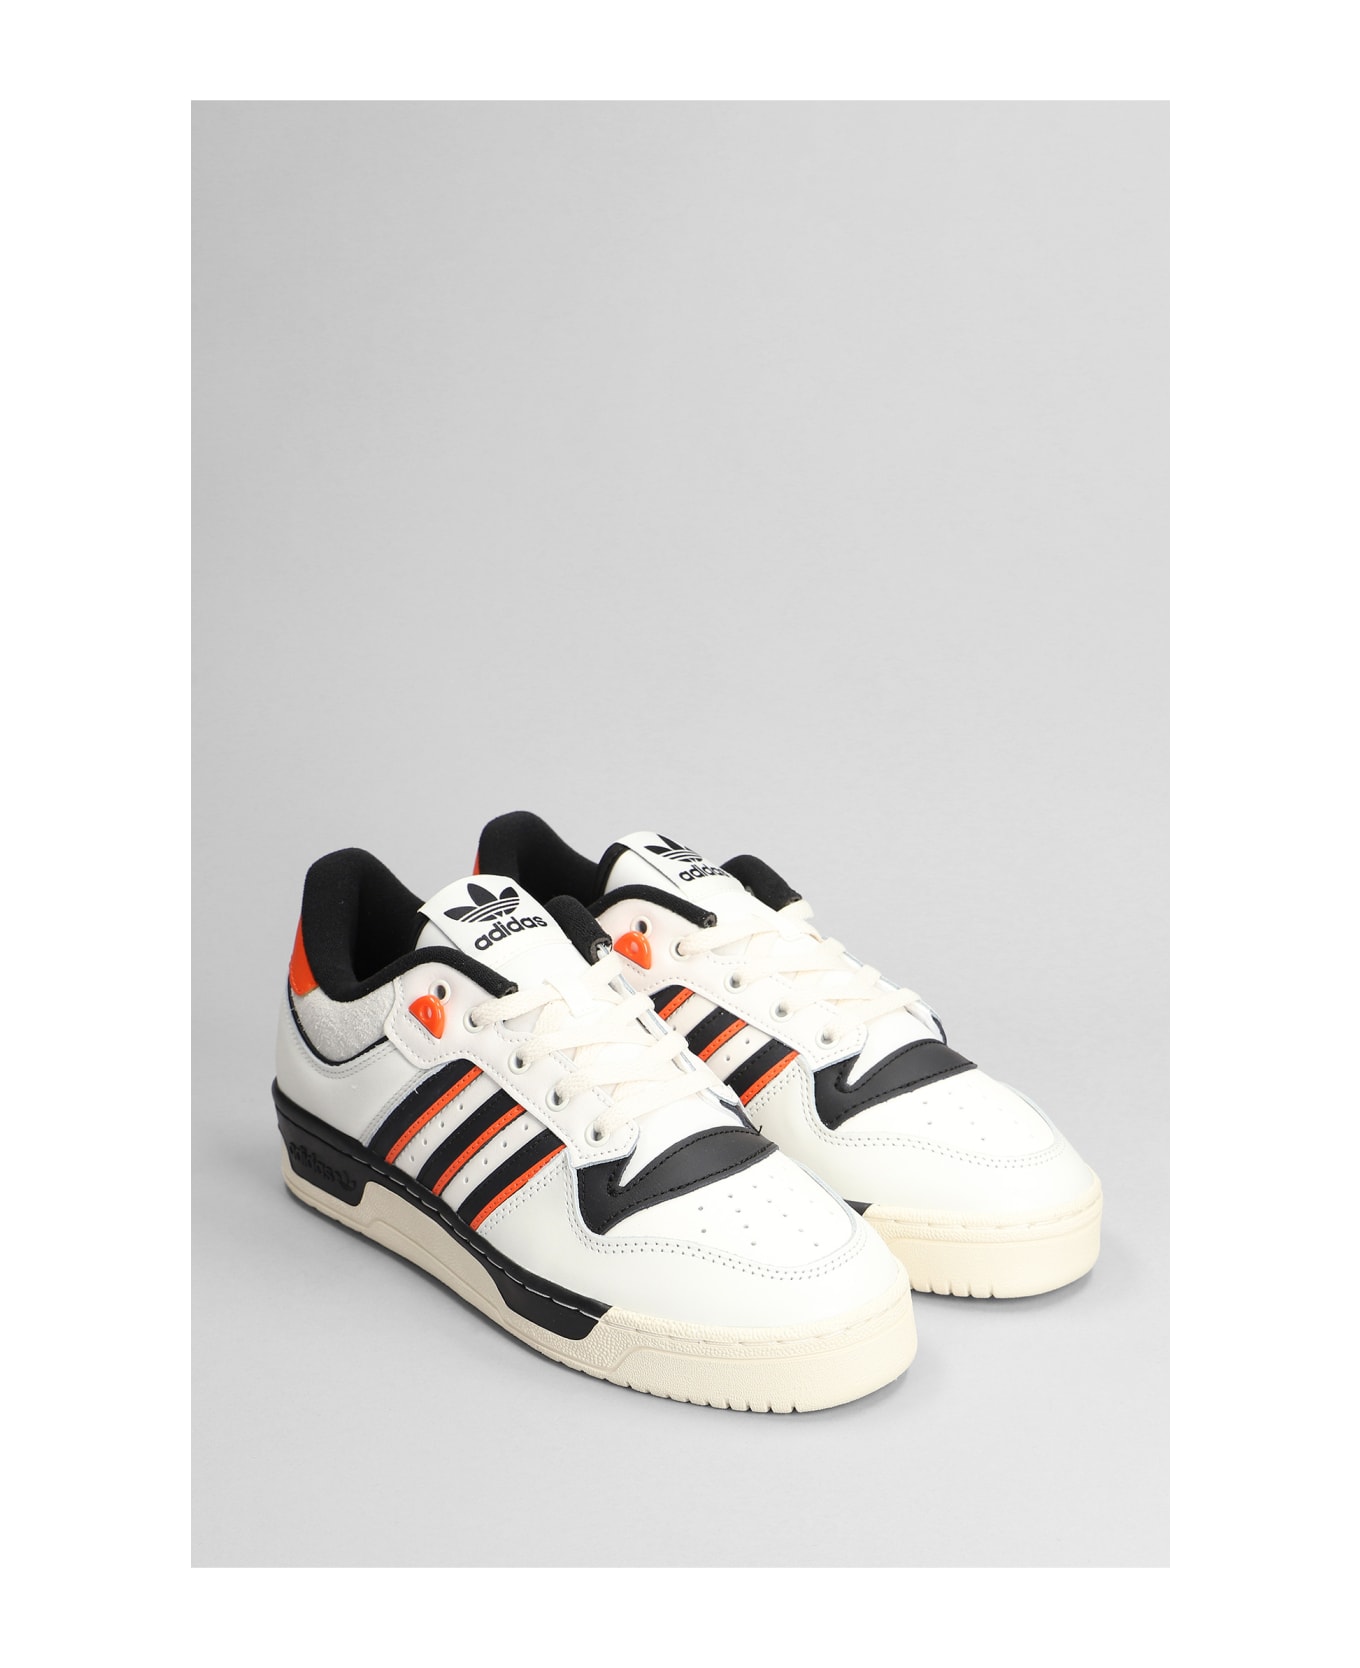 Adidas Rivalry 86 Low Sneakers In White Leather - white